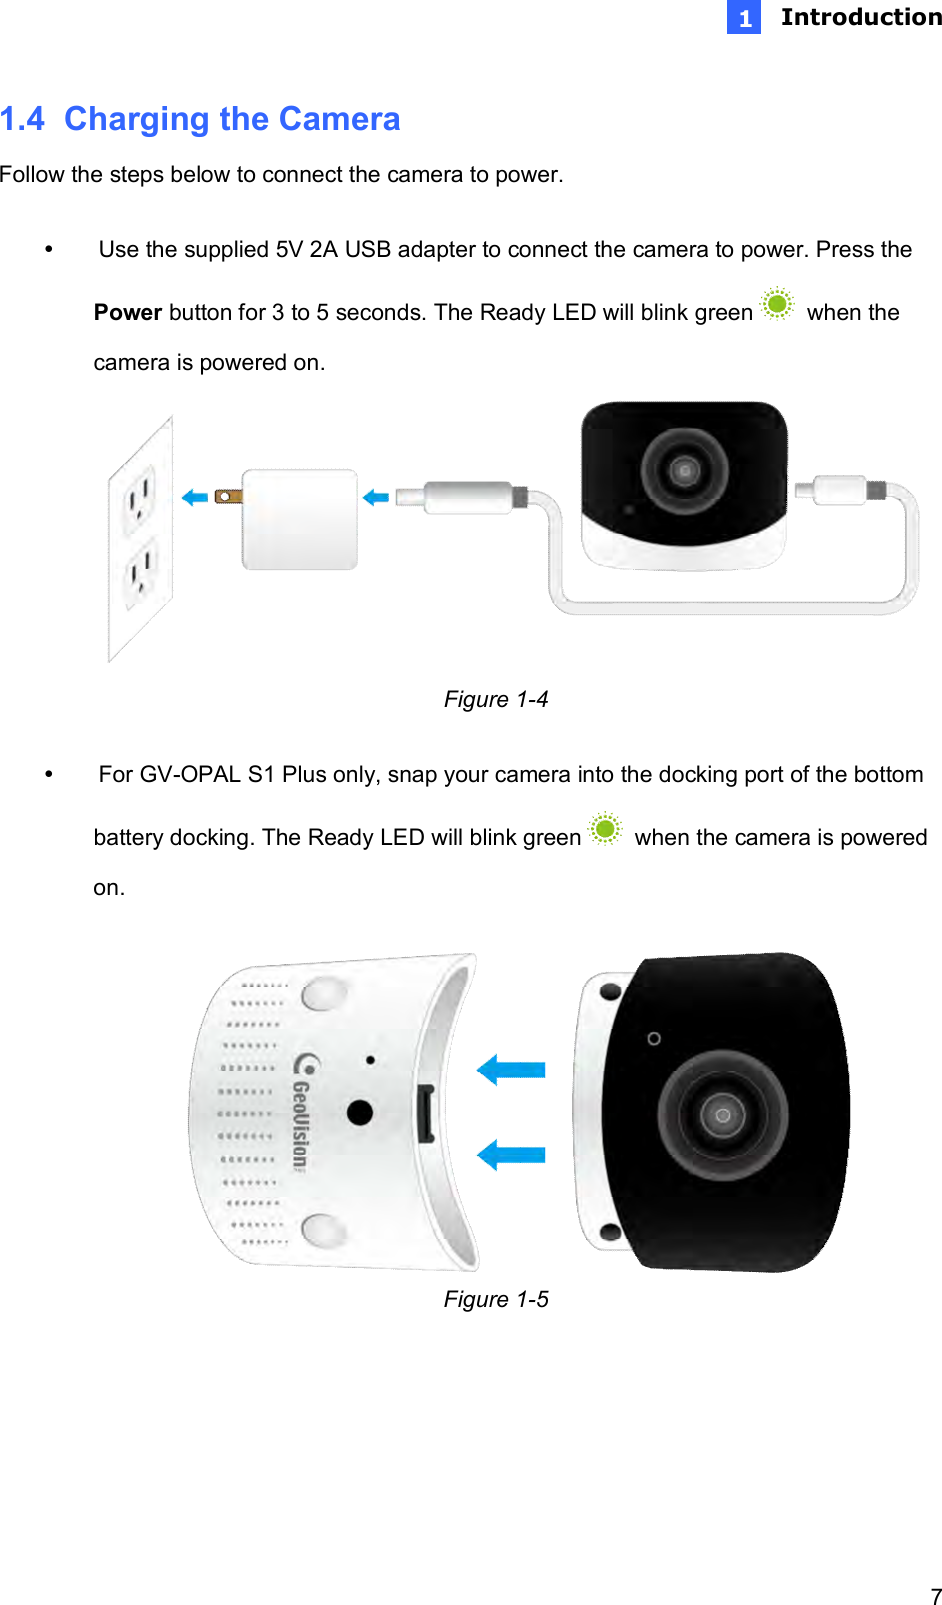  Introduction   7 1n1.4  Charging the Camera Follow the steps below to connect the camera to power.    Use the supplied 5V 2A USB adapter to connect the camera to power. Press the Power button for 3 to 5 seconds. The Ready LED will blink green    when the camera is powered on.           Figure 1-4    For GV-OPAL S1 Plus only, snap your camera into the docking port of the bottom battery docking. The Ready LED will blink green    when the camera is powered on.   Figure 1-5     